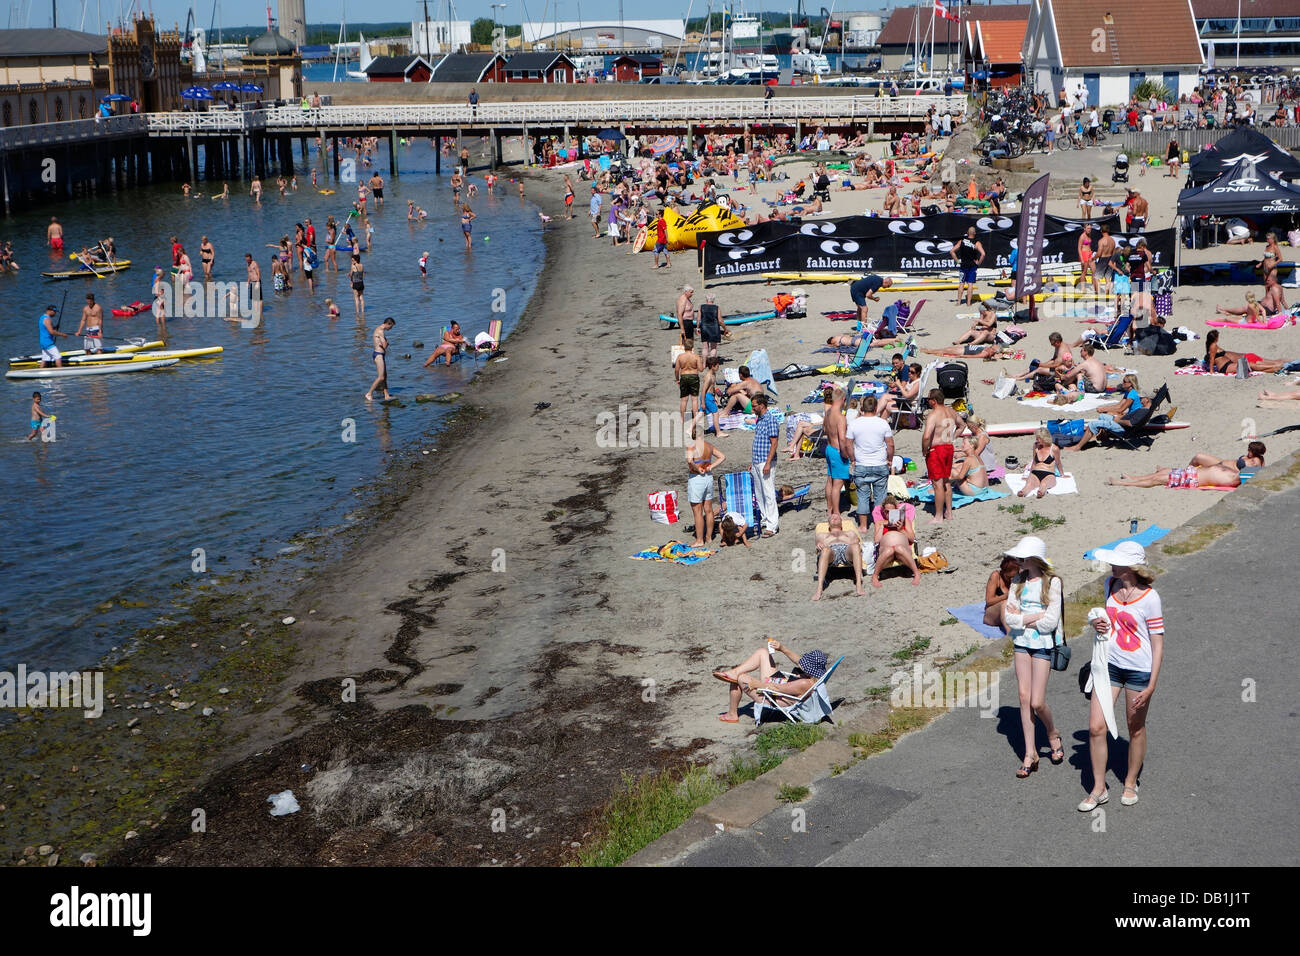 People bathing and sunning on the sandy beach. Varberg, Haland, Sweden. Stock Photo